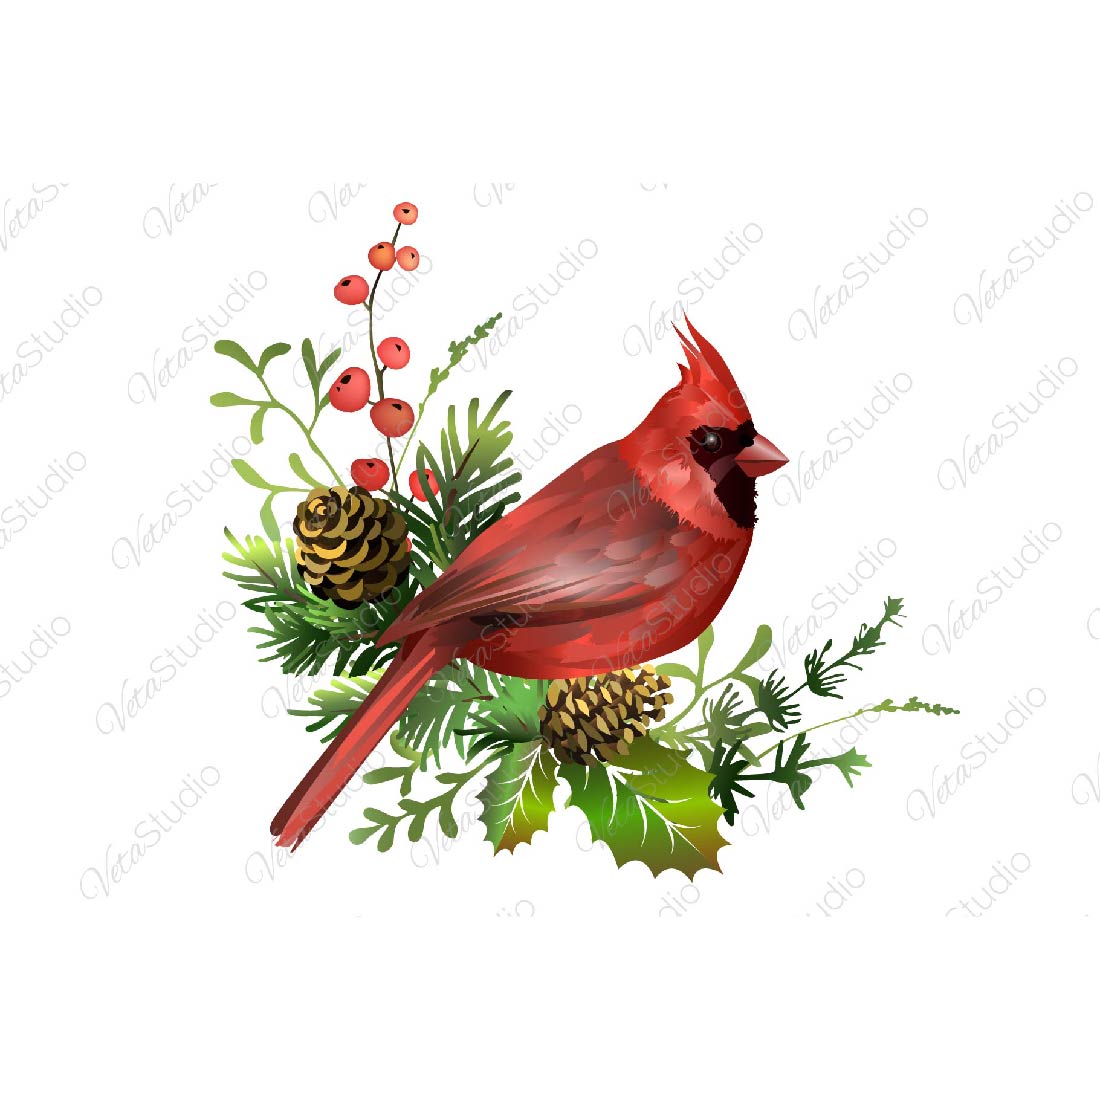 Red Cardinal Bird With Pine Branch - main image preview.